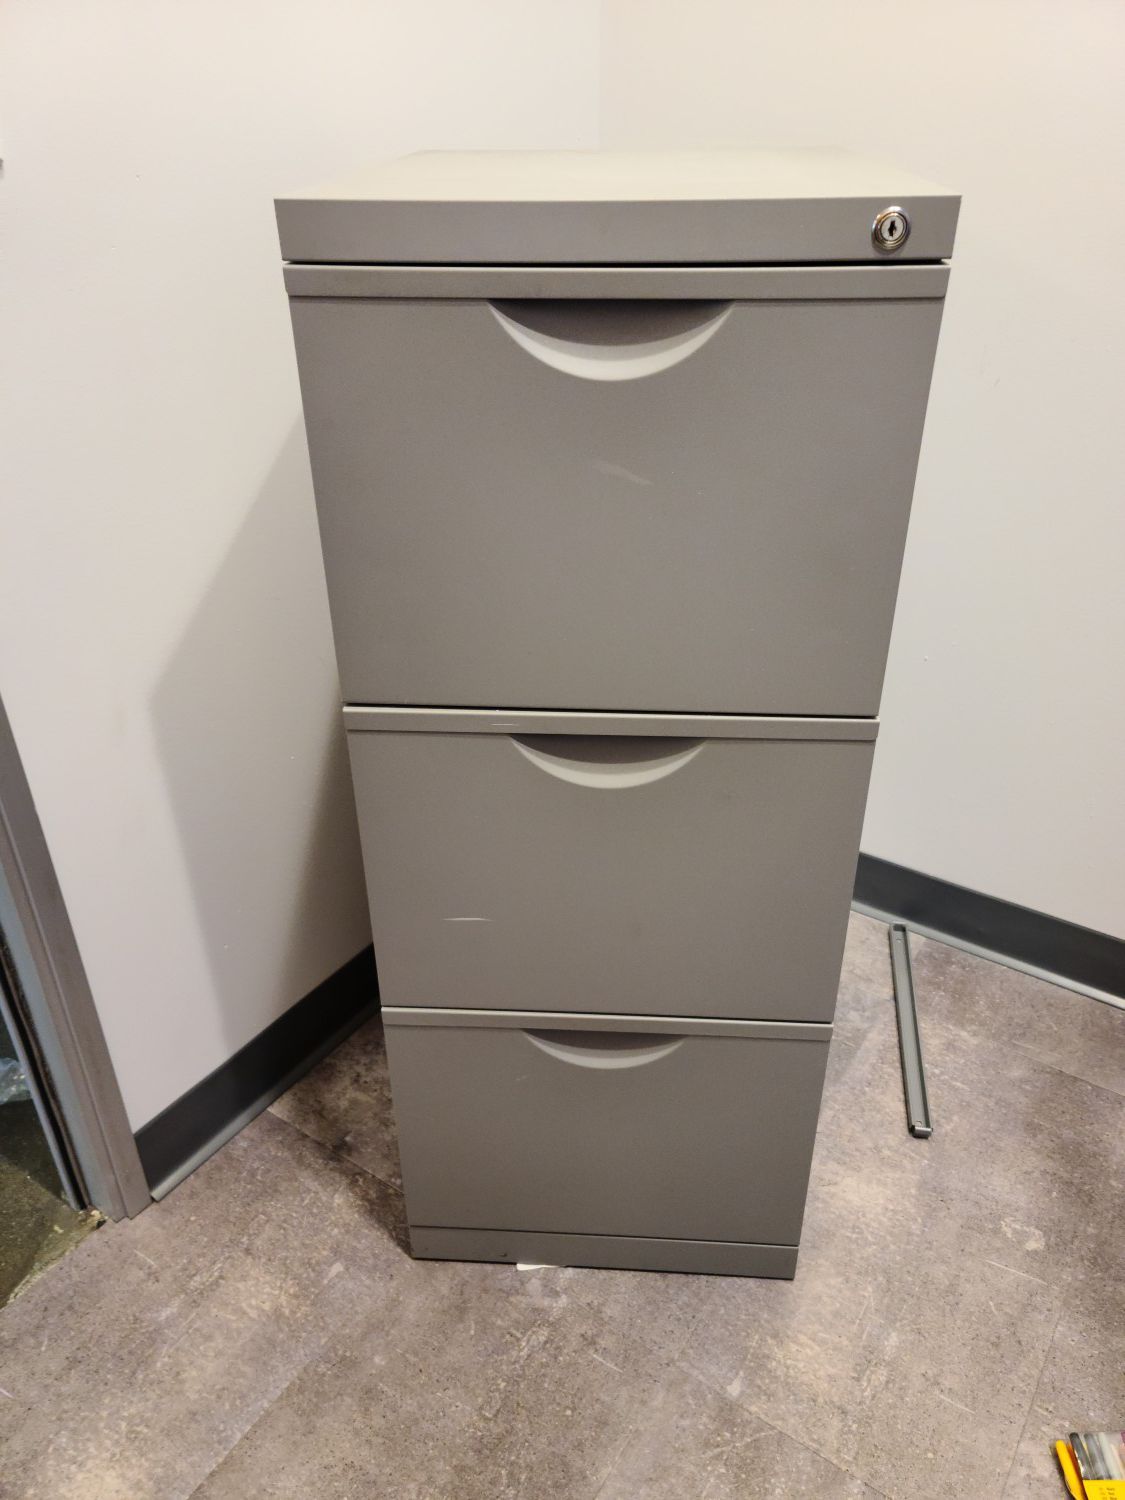 File cabinet with key lock - gray metal